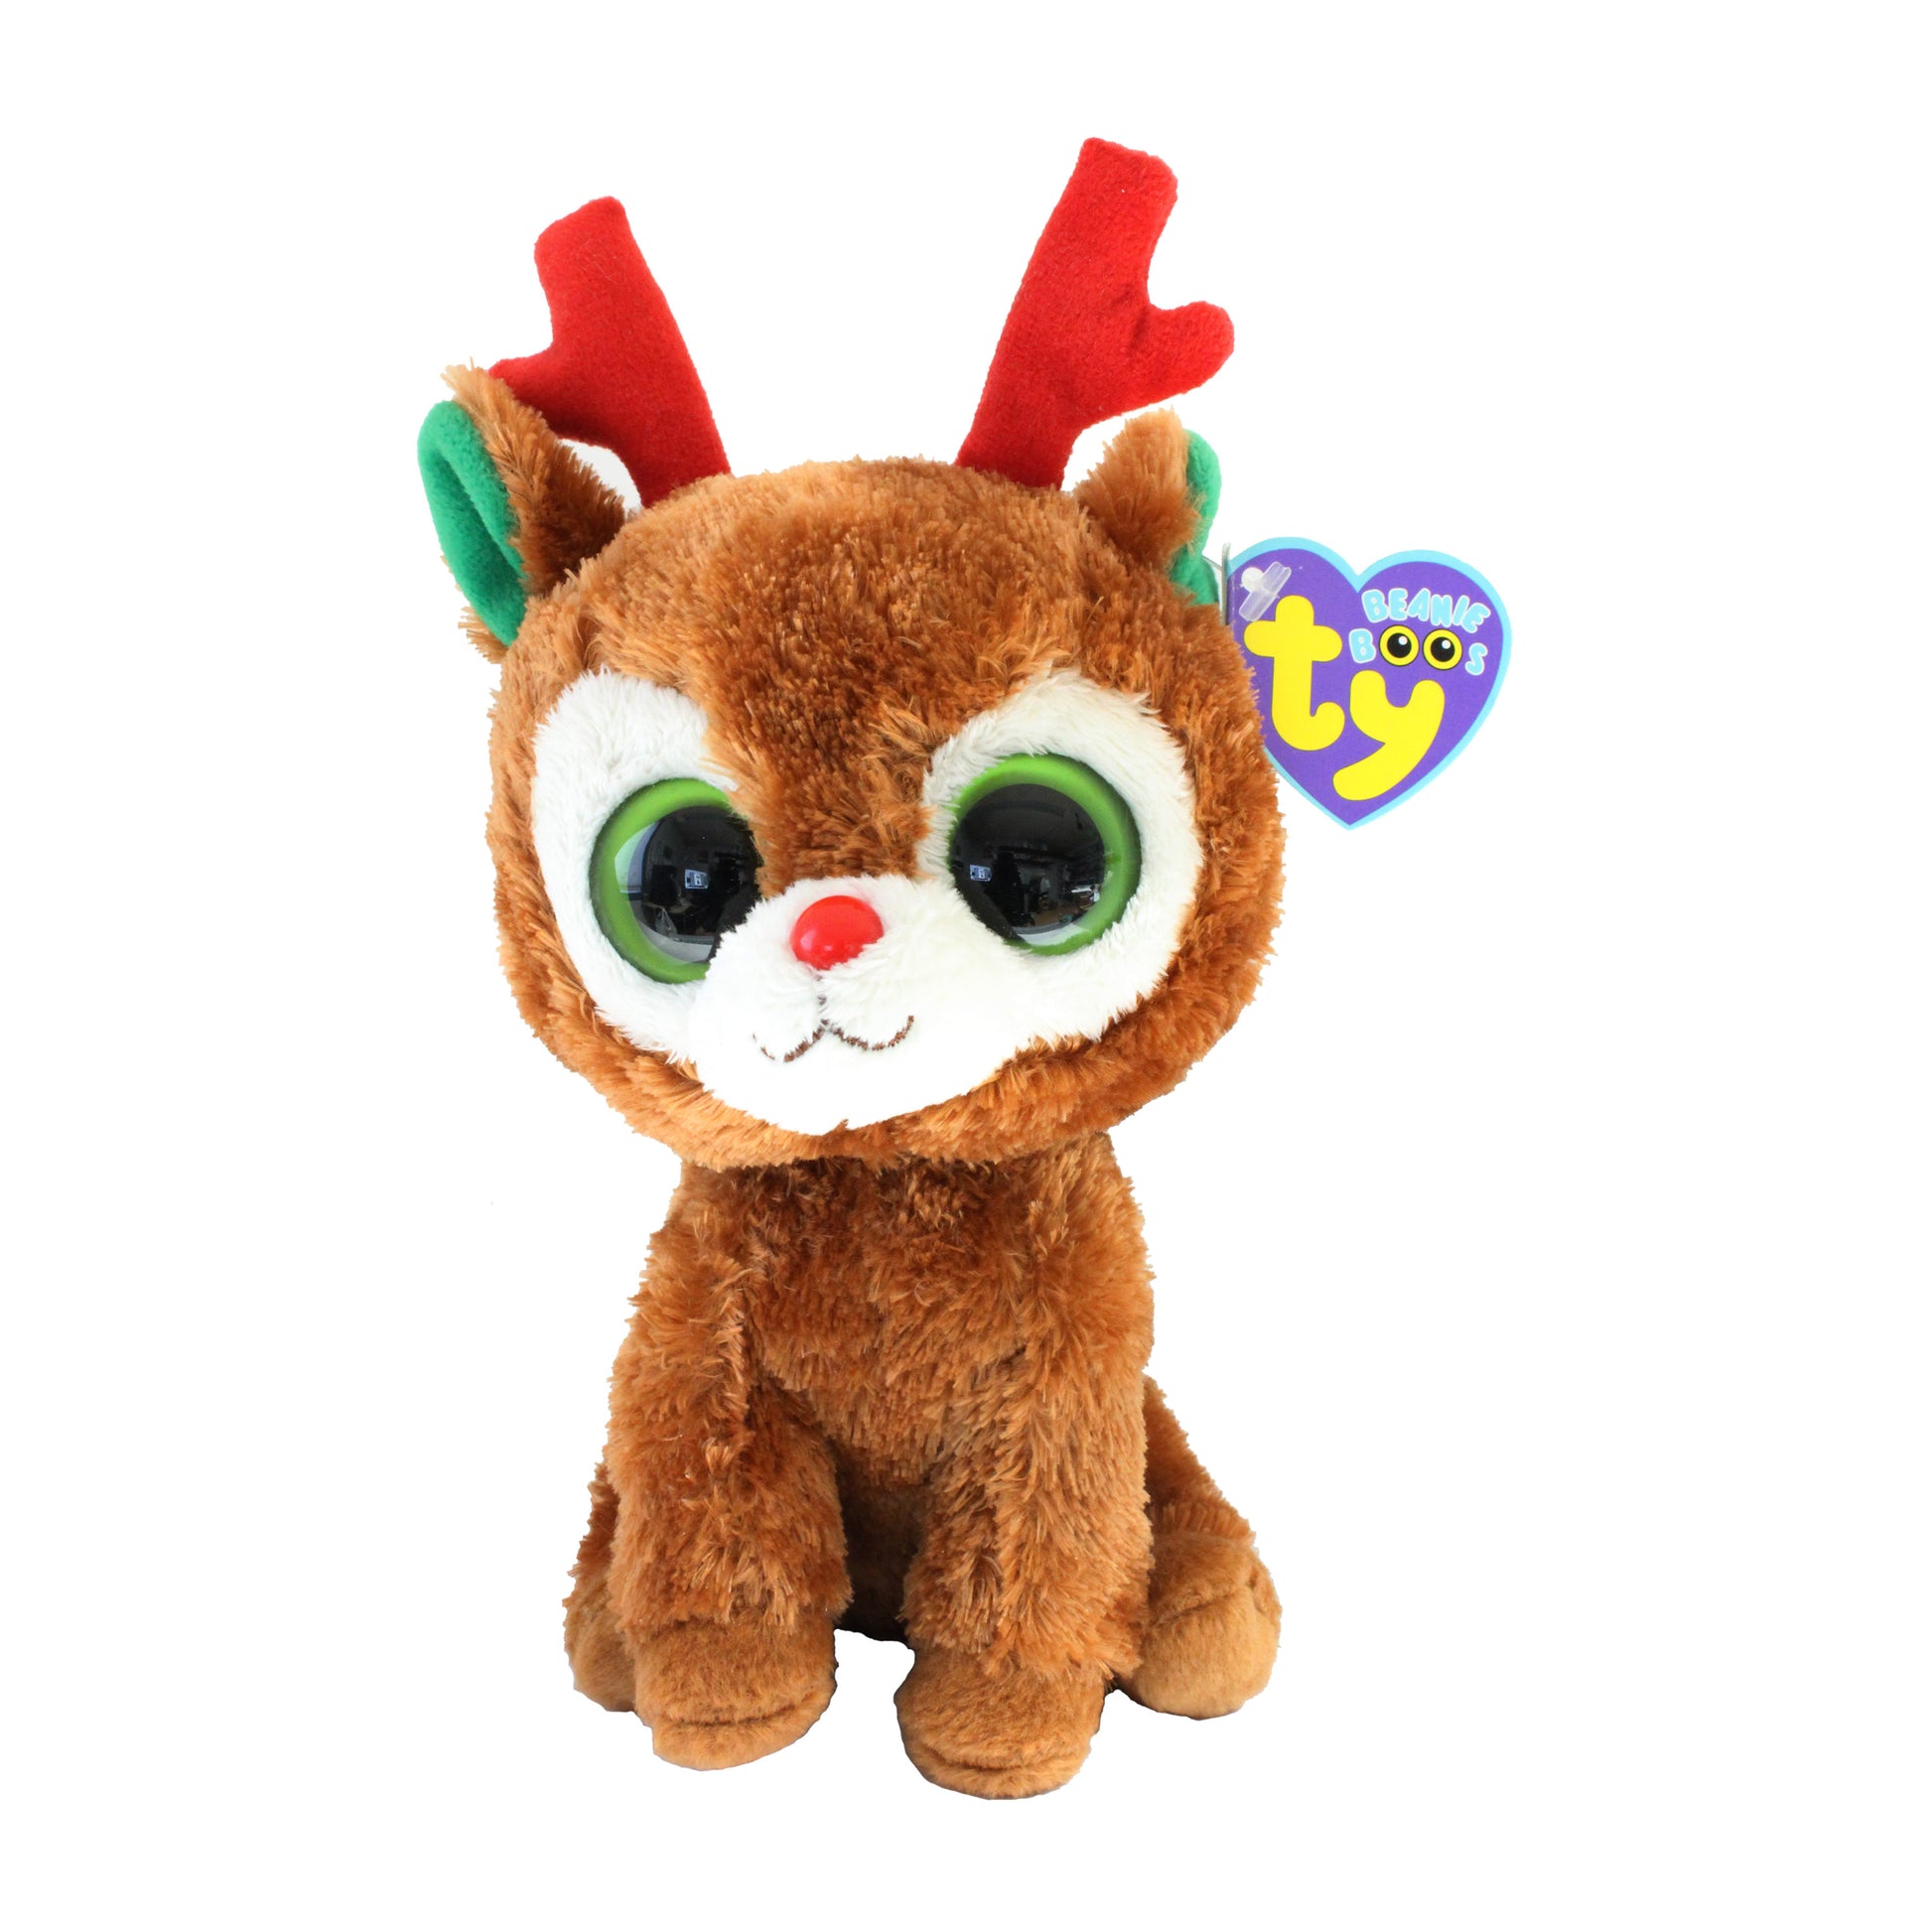 TY Beanie Boos - Comet The Reindeer - 6 inch - pre-owned - MWMT – StravaMax  Jewelry Etc